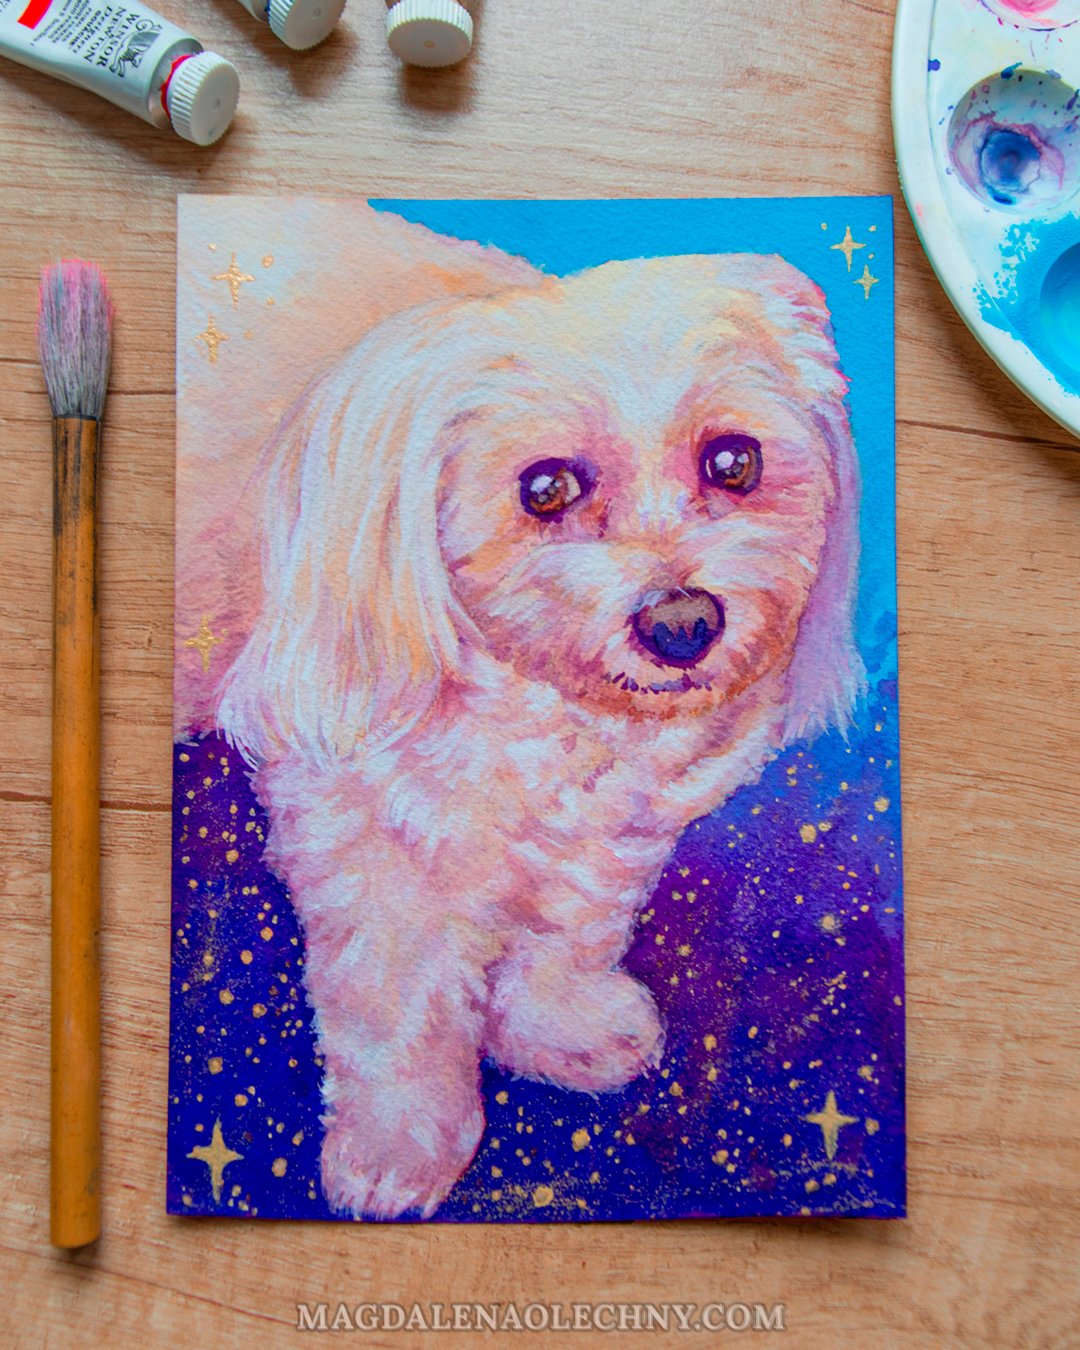 A painting of a Maltese dog on a galaxy background. The portrait is surrounded by paints, a brush, and a palette.